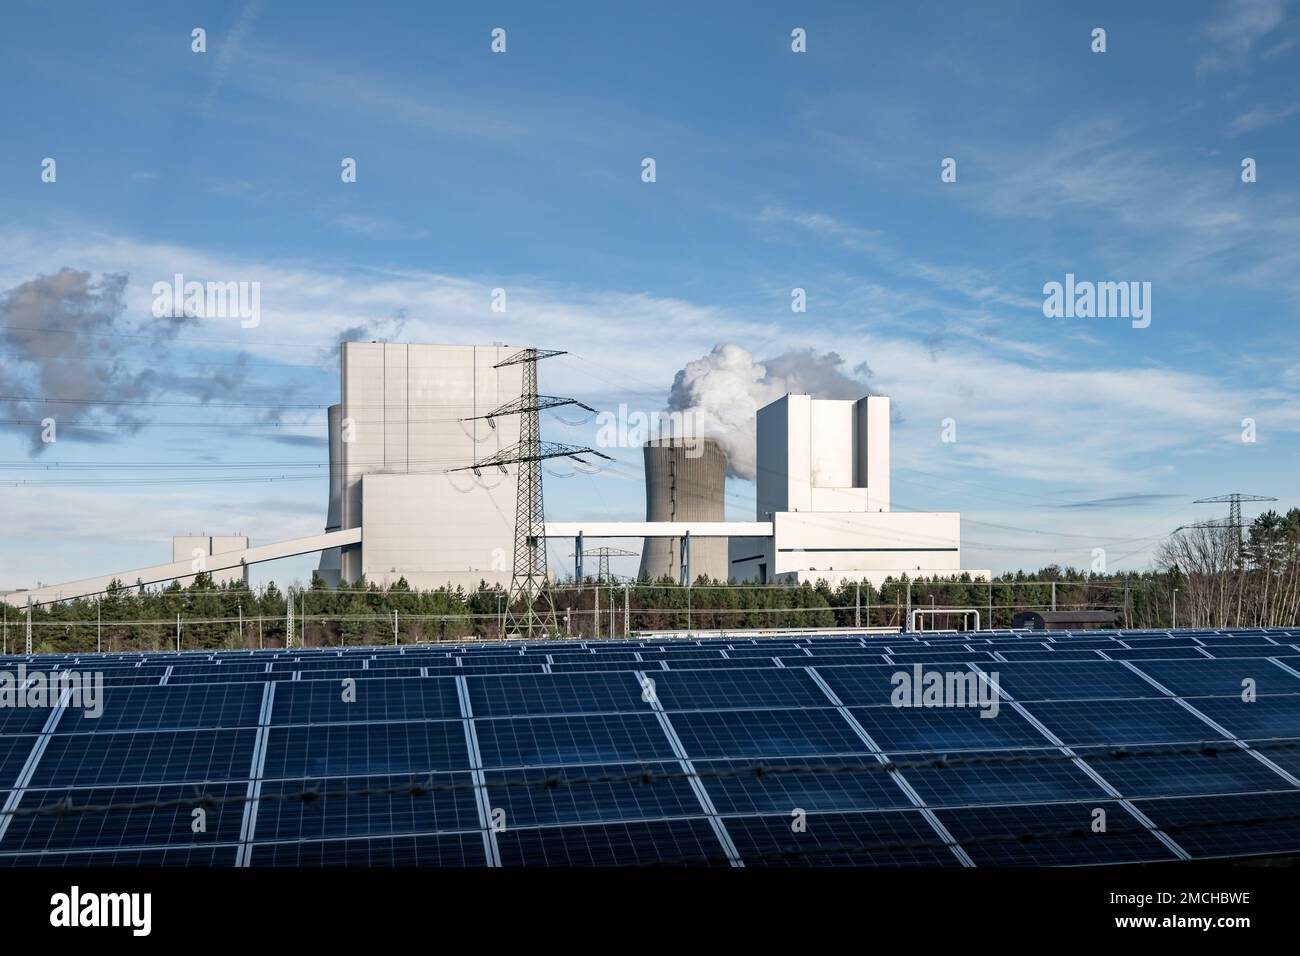 Boxberg lignite power plant with solar cell panels in front. Fossil fuels versus renewable energy. The energy turnaround in Germany is a revolution. Stock Photo